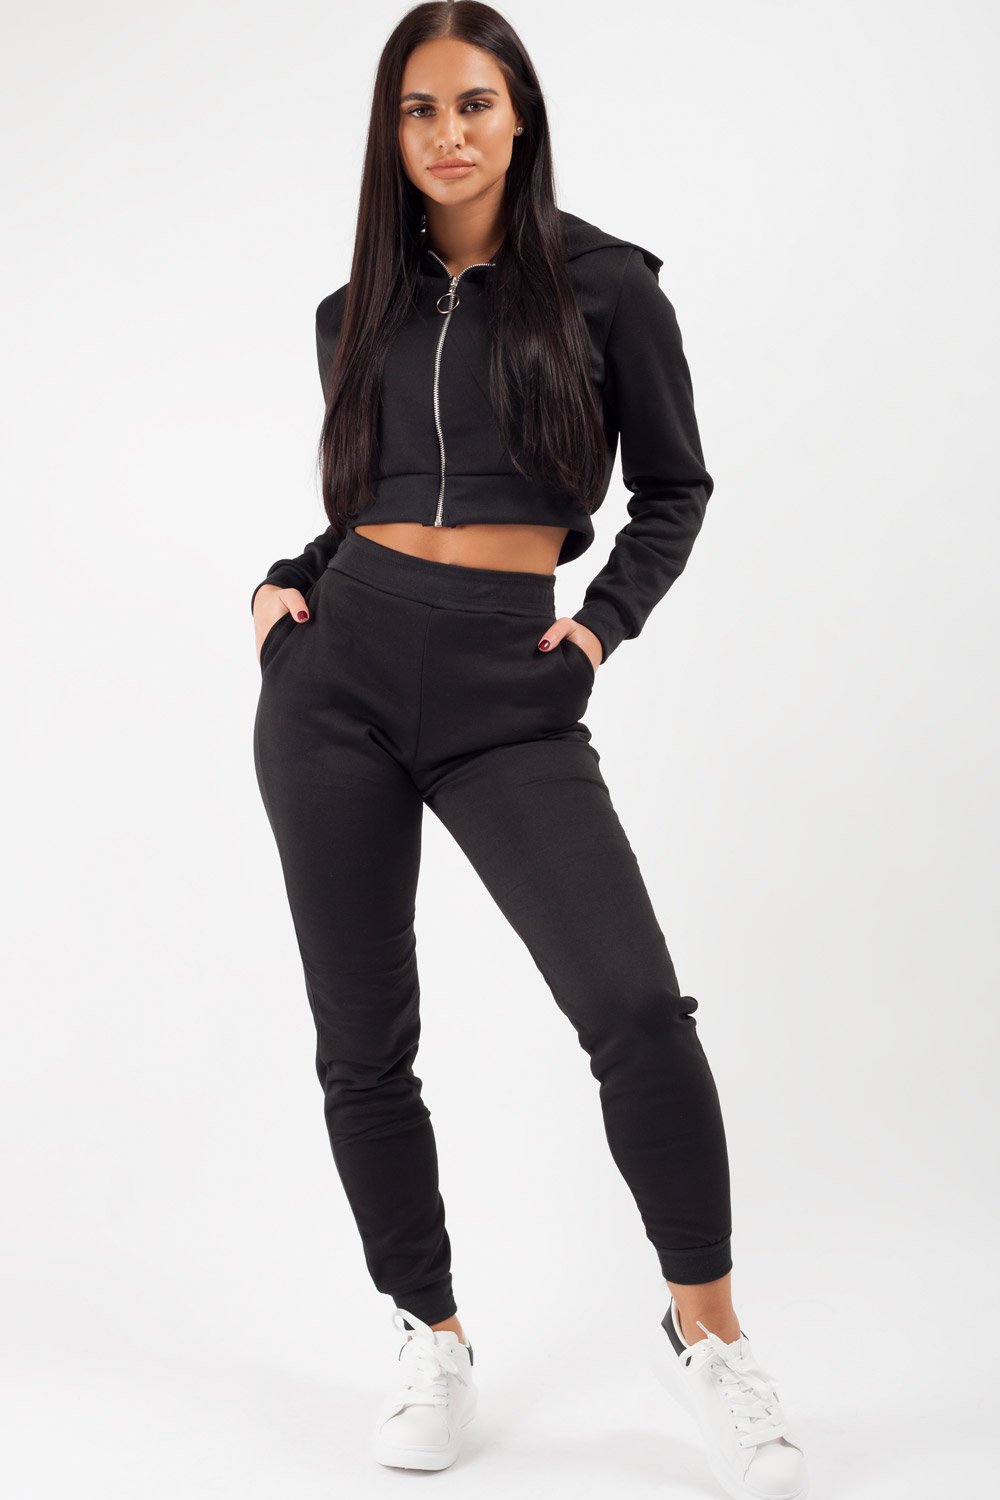 Black Cropped Hoodie And Joggers Loungewear Co-Ord Set – Styledup.co.uk